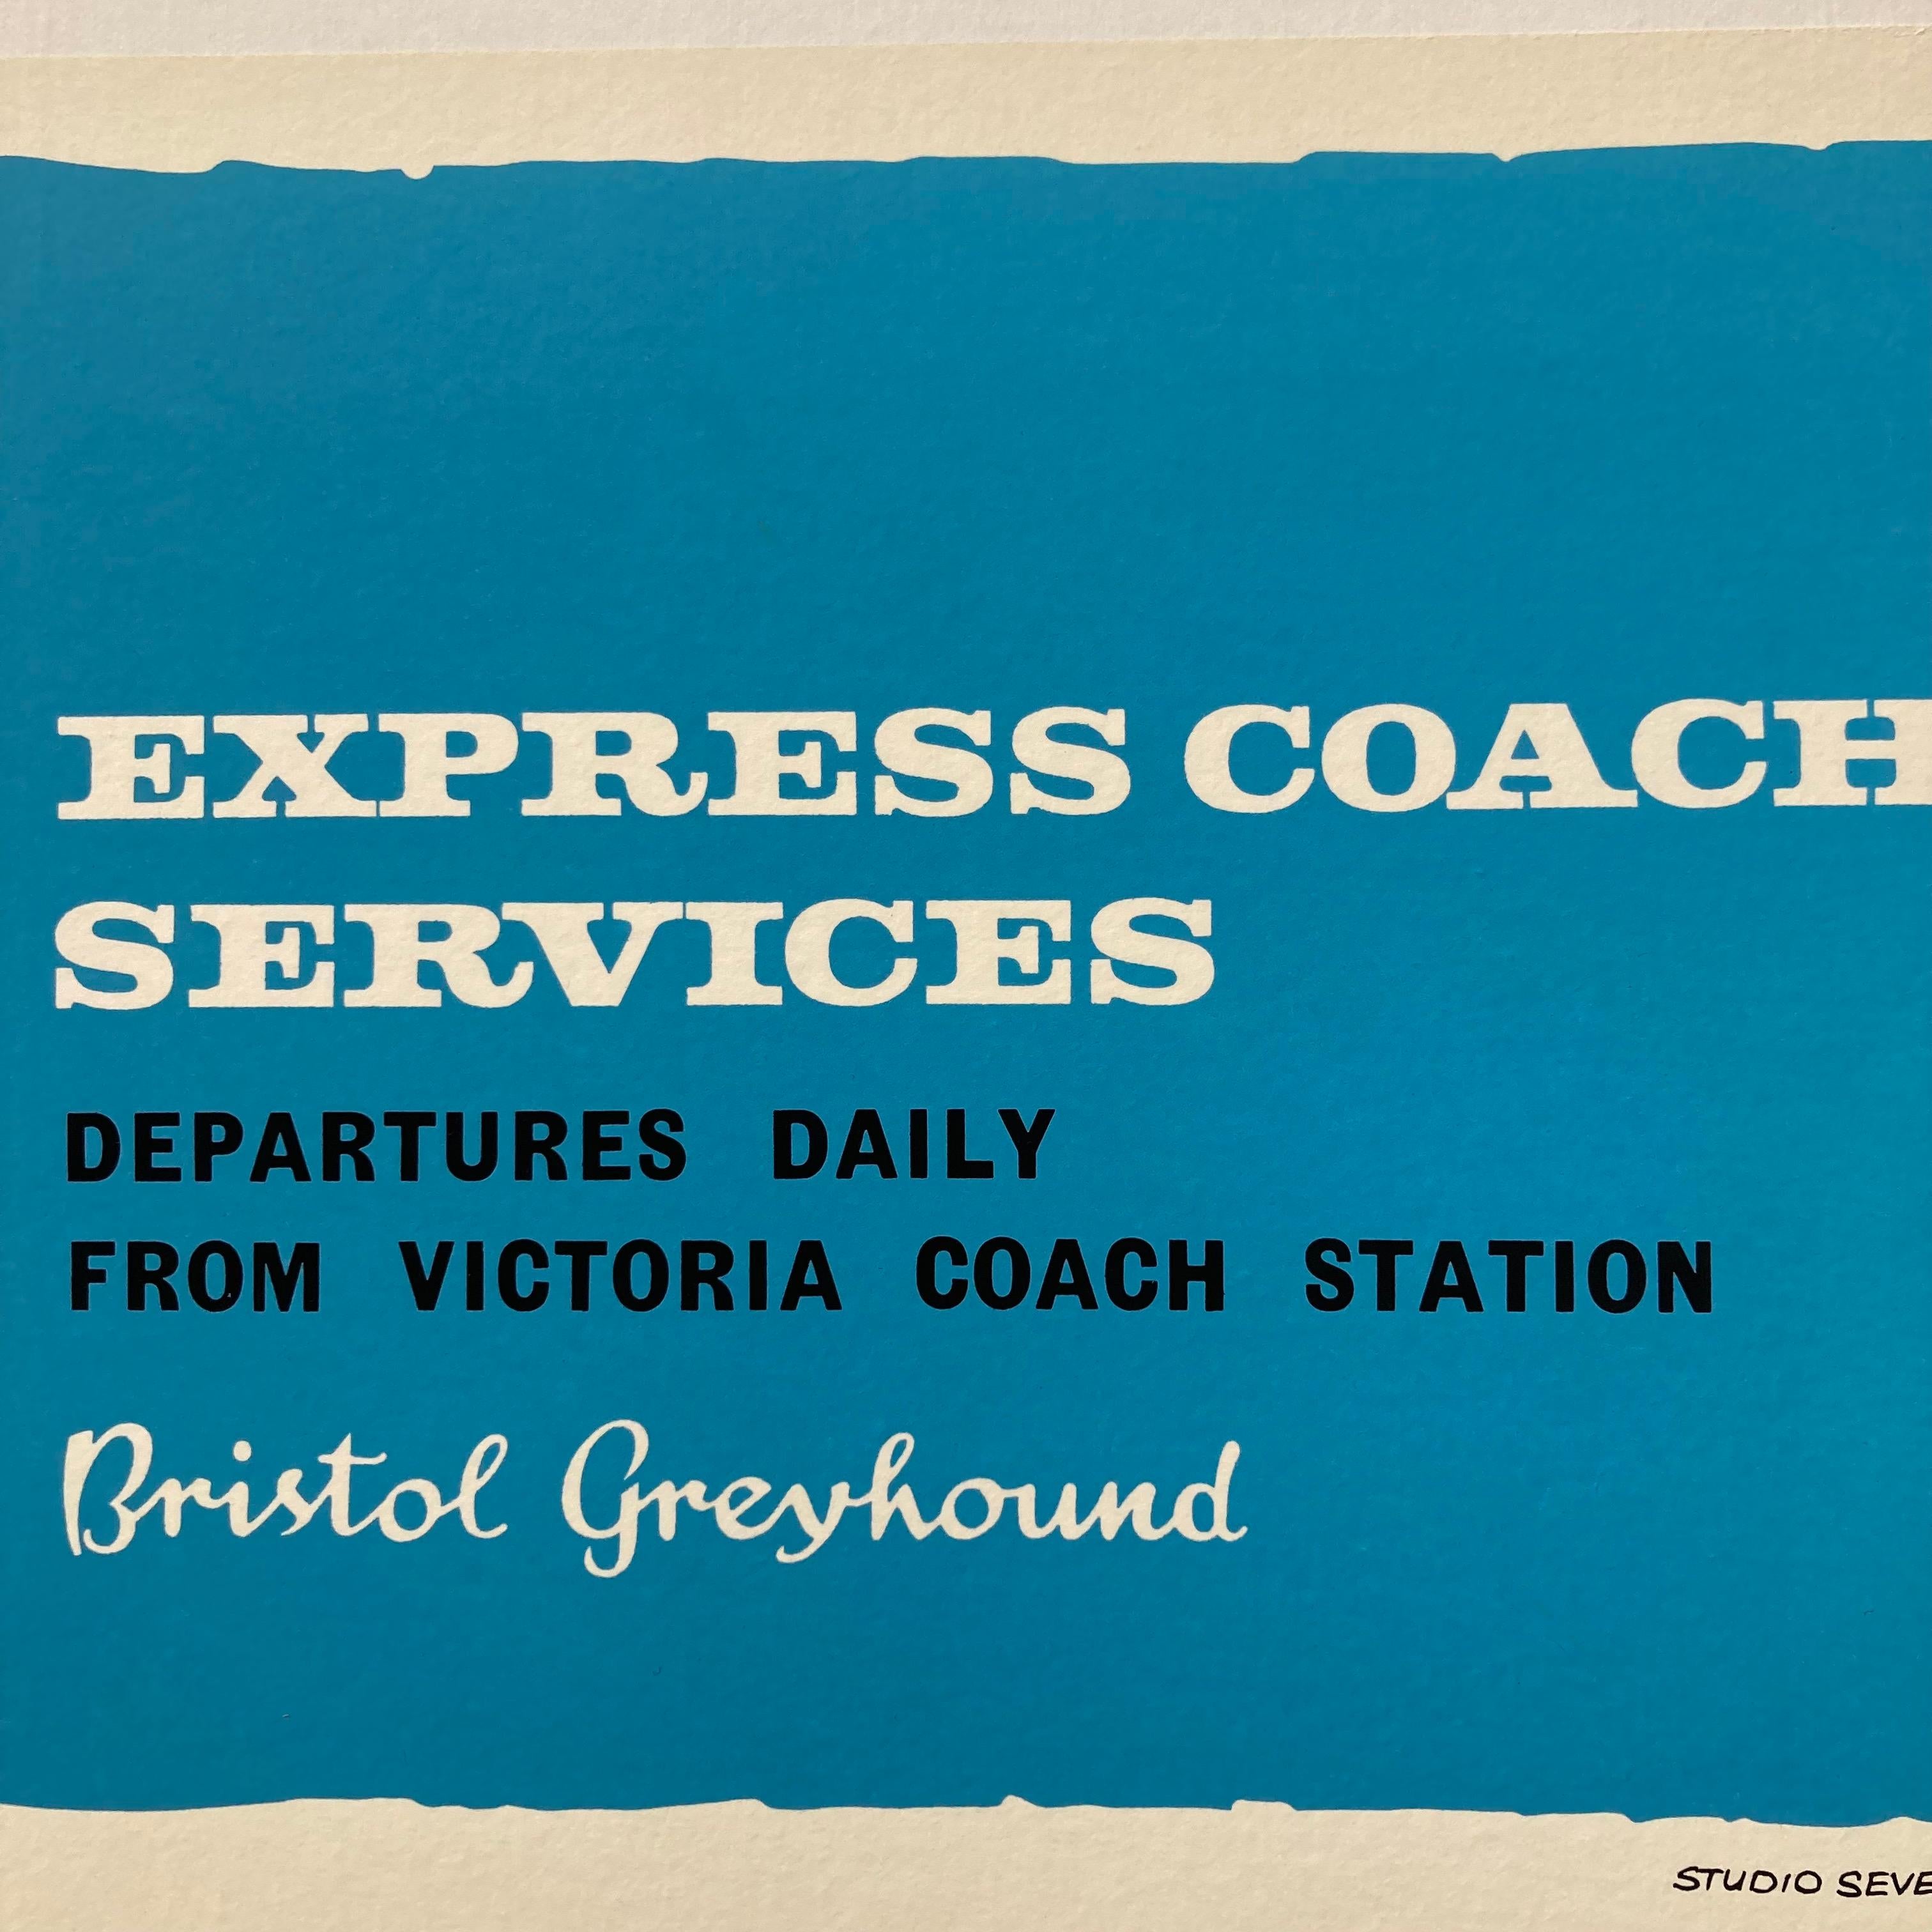 1960's Bristol Greyhound Travel Poster In Good Condition For Sale In London, GB